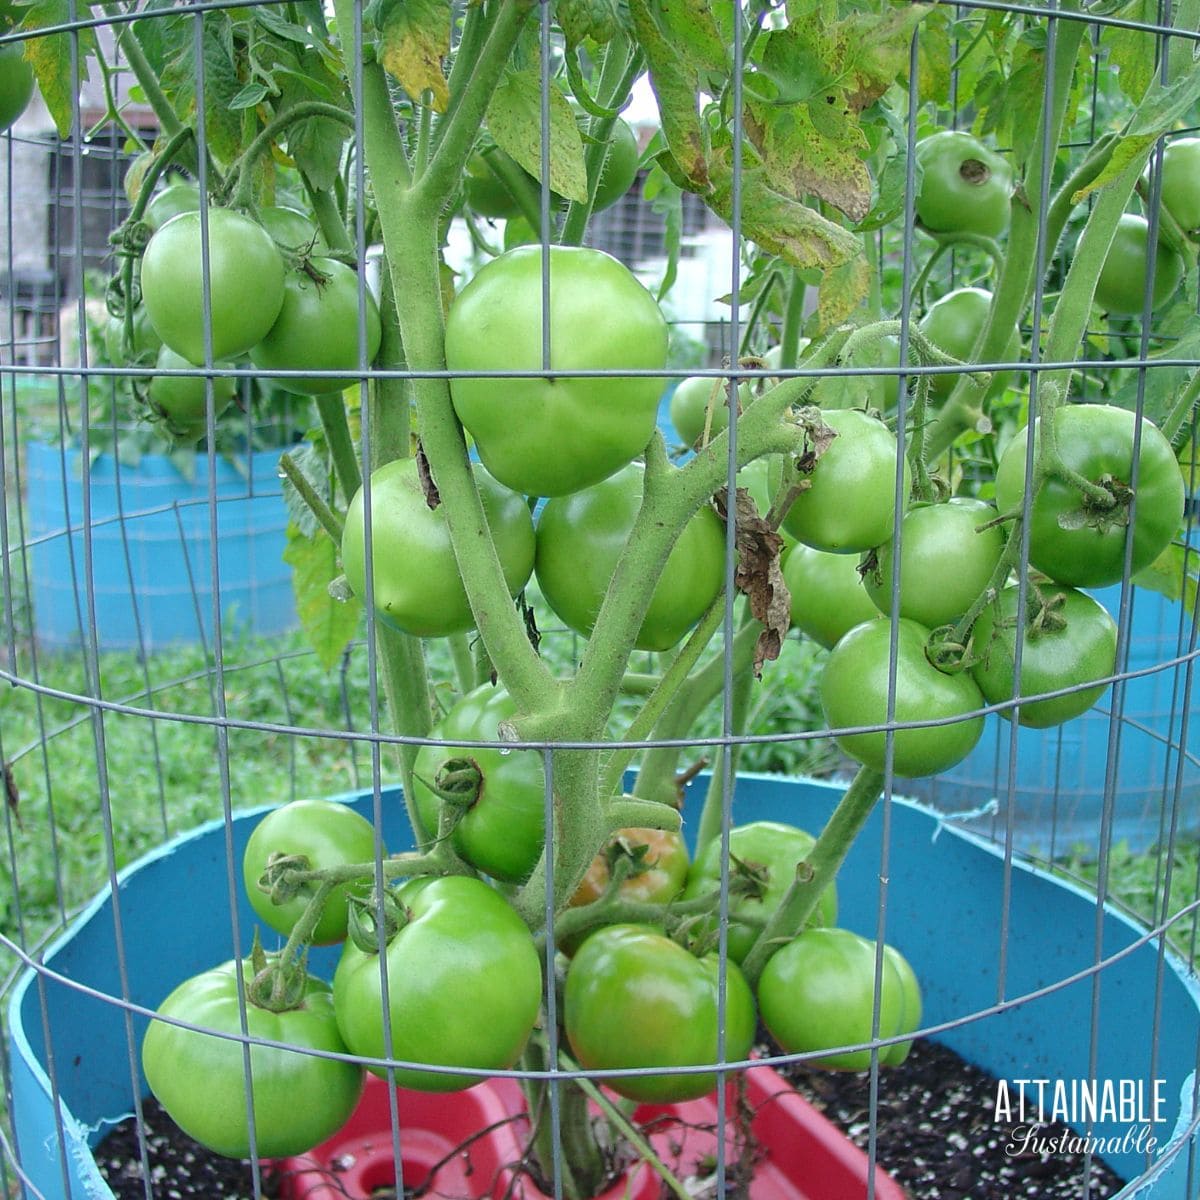 tomato plant in an upcycled blue barrel planter with lots of green tomatoes on it.